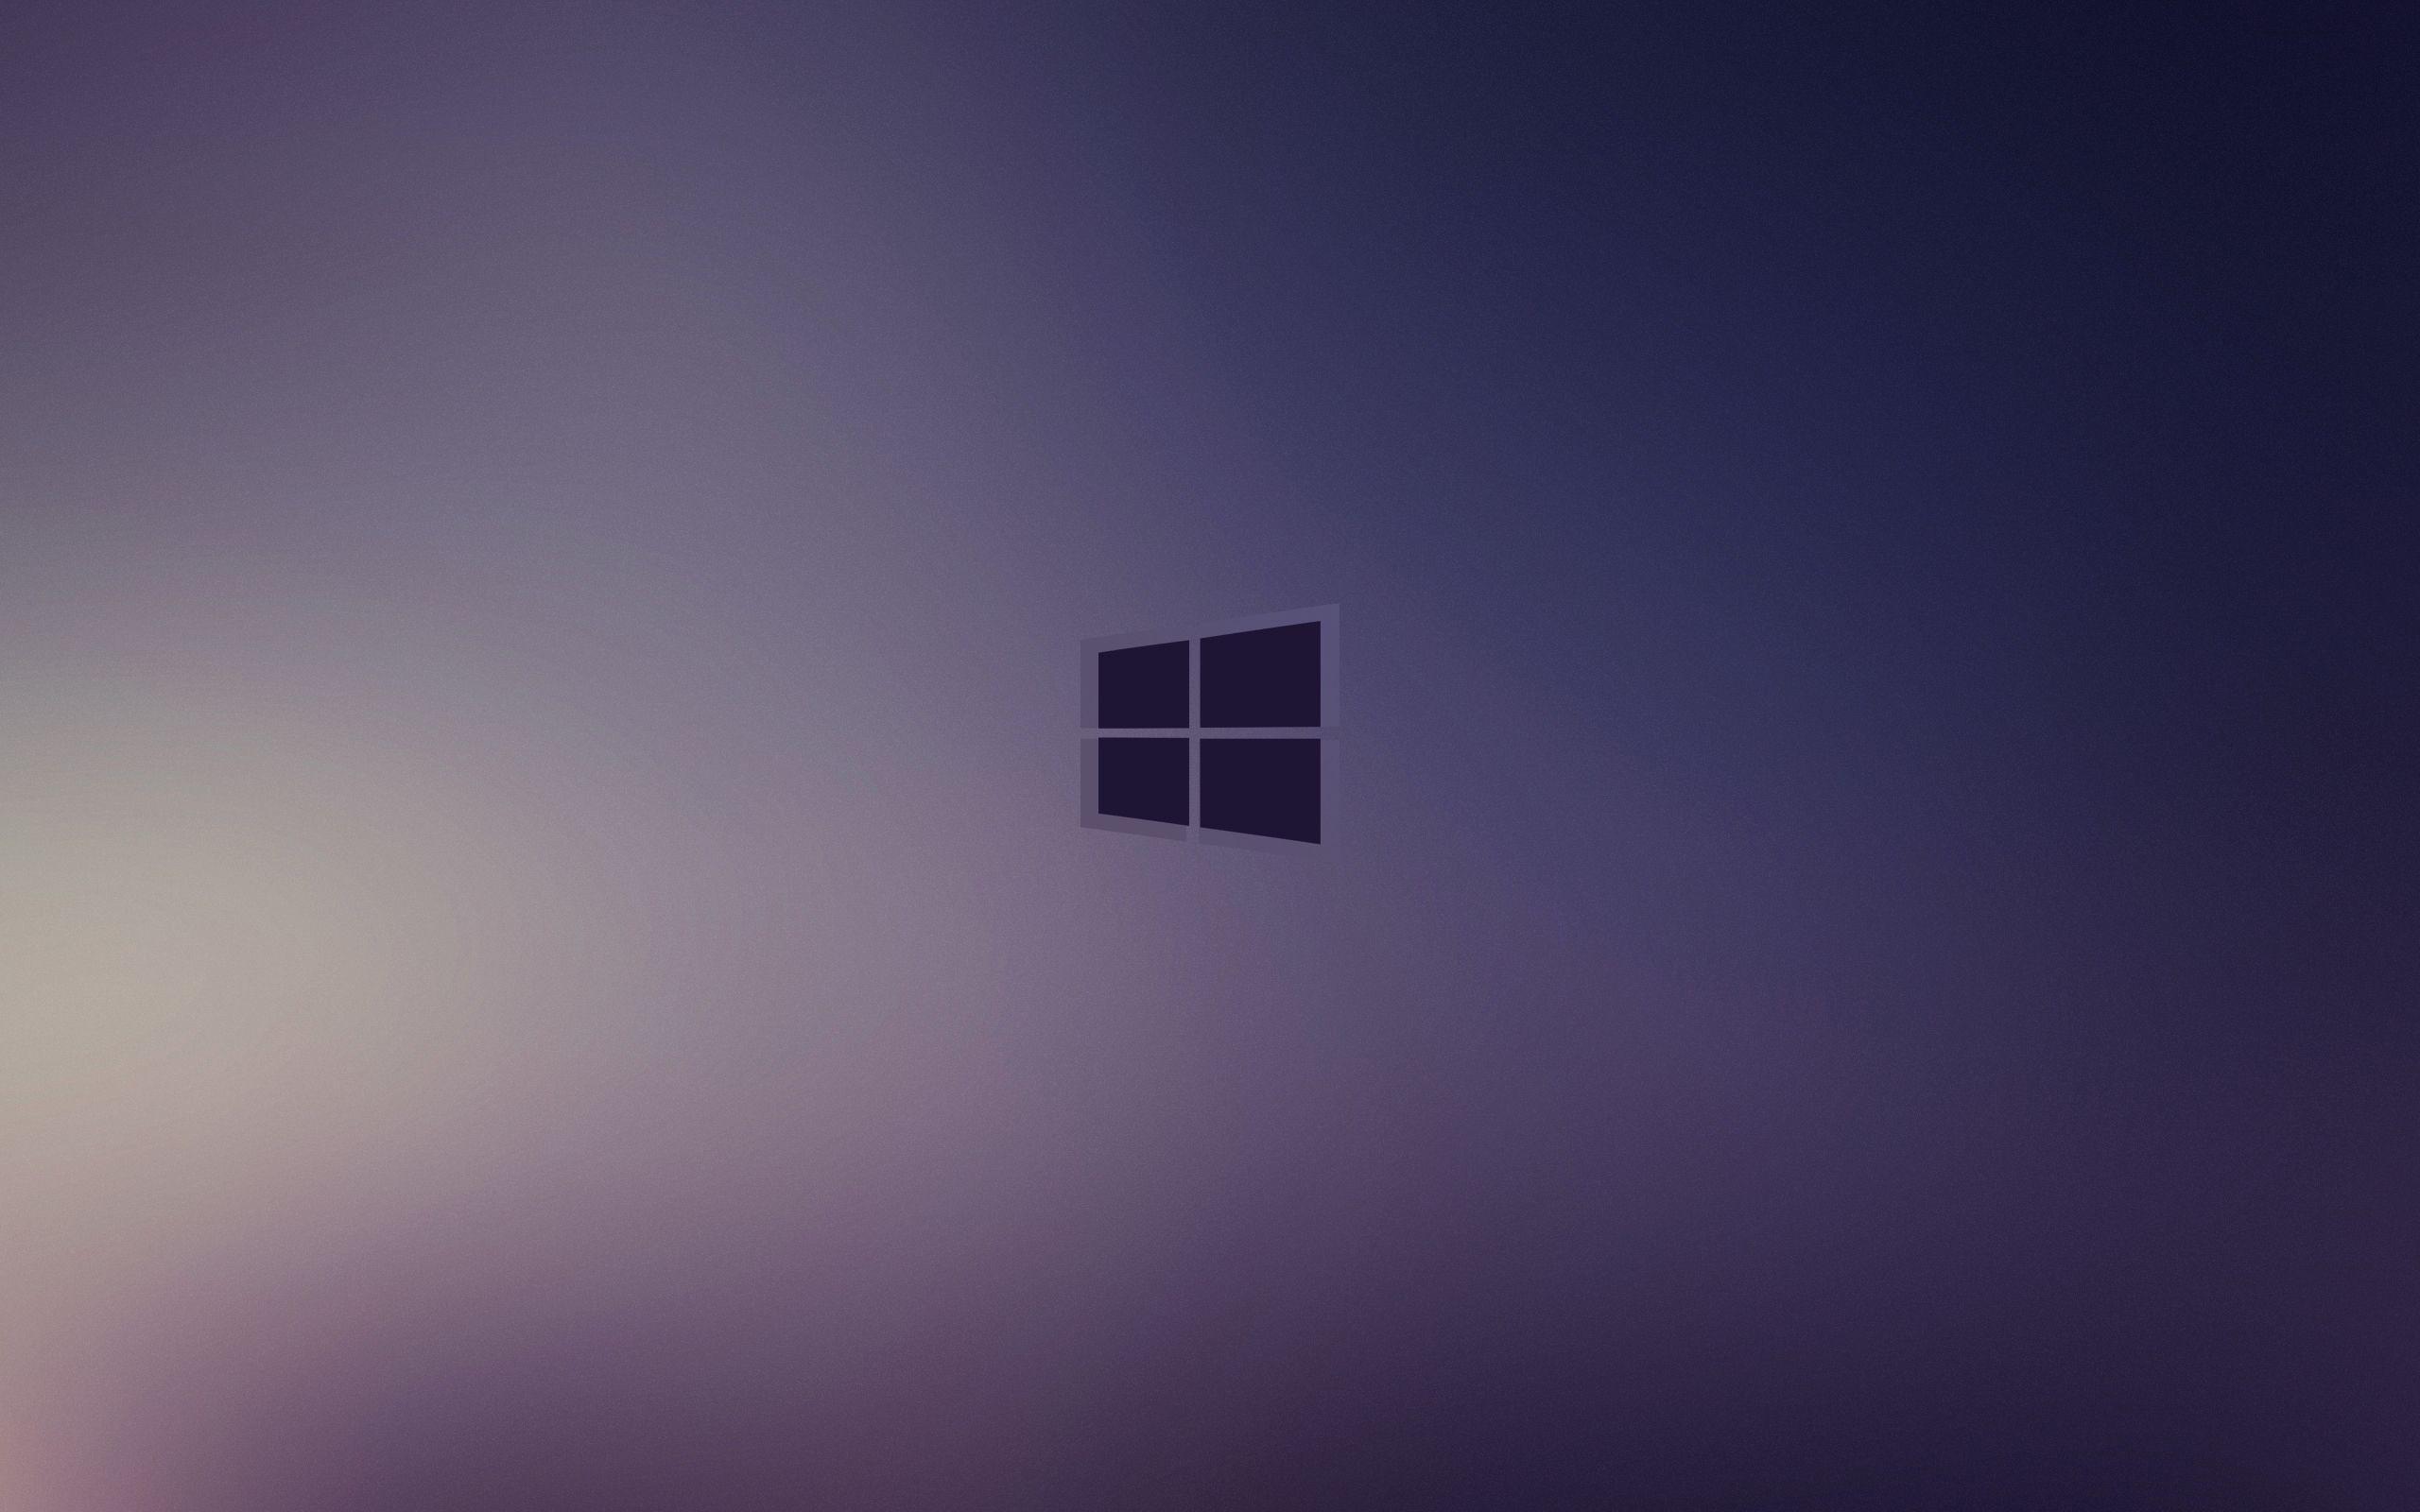 HD Wallpapers for Windows 10 